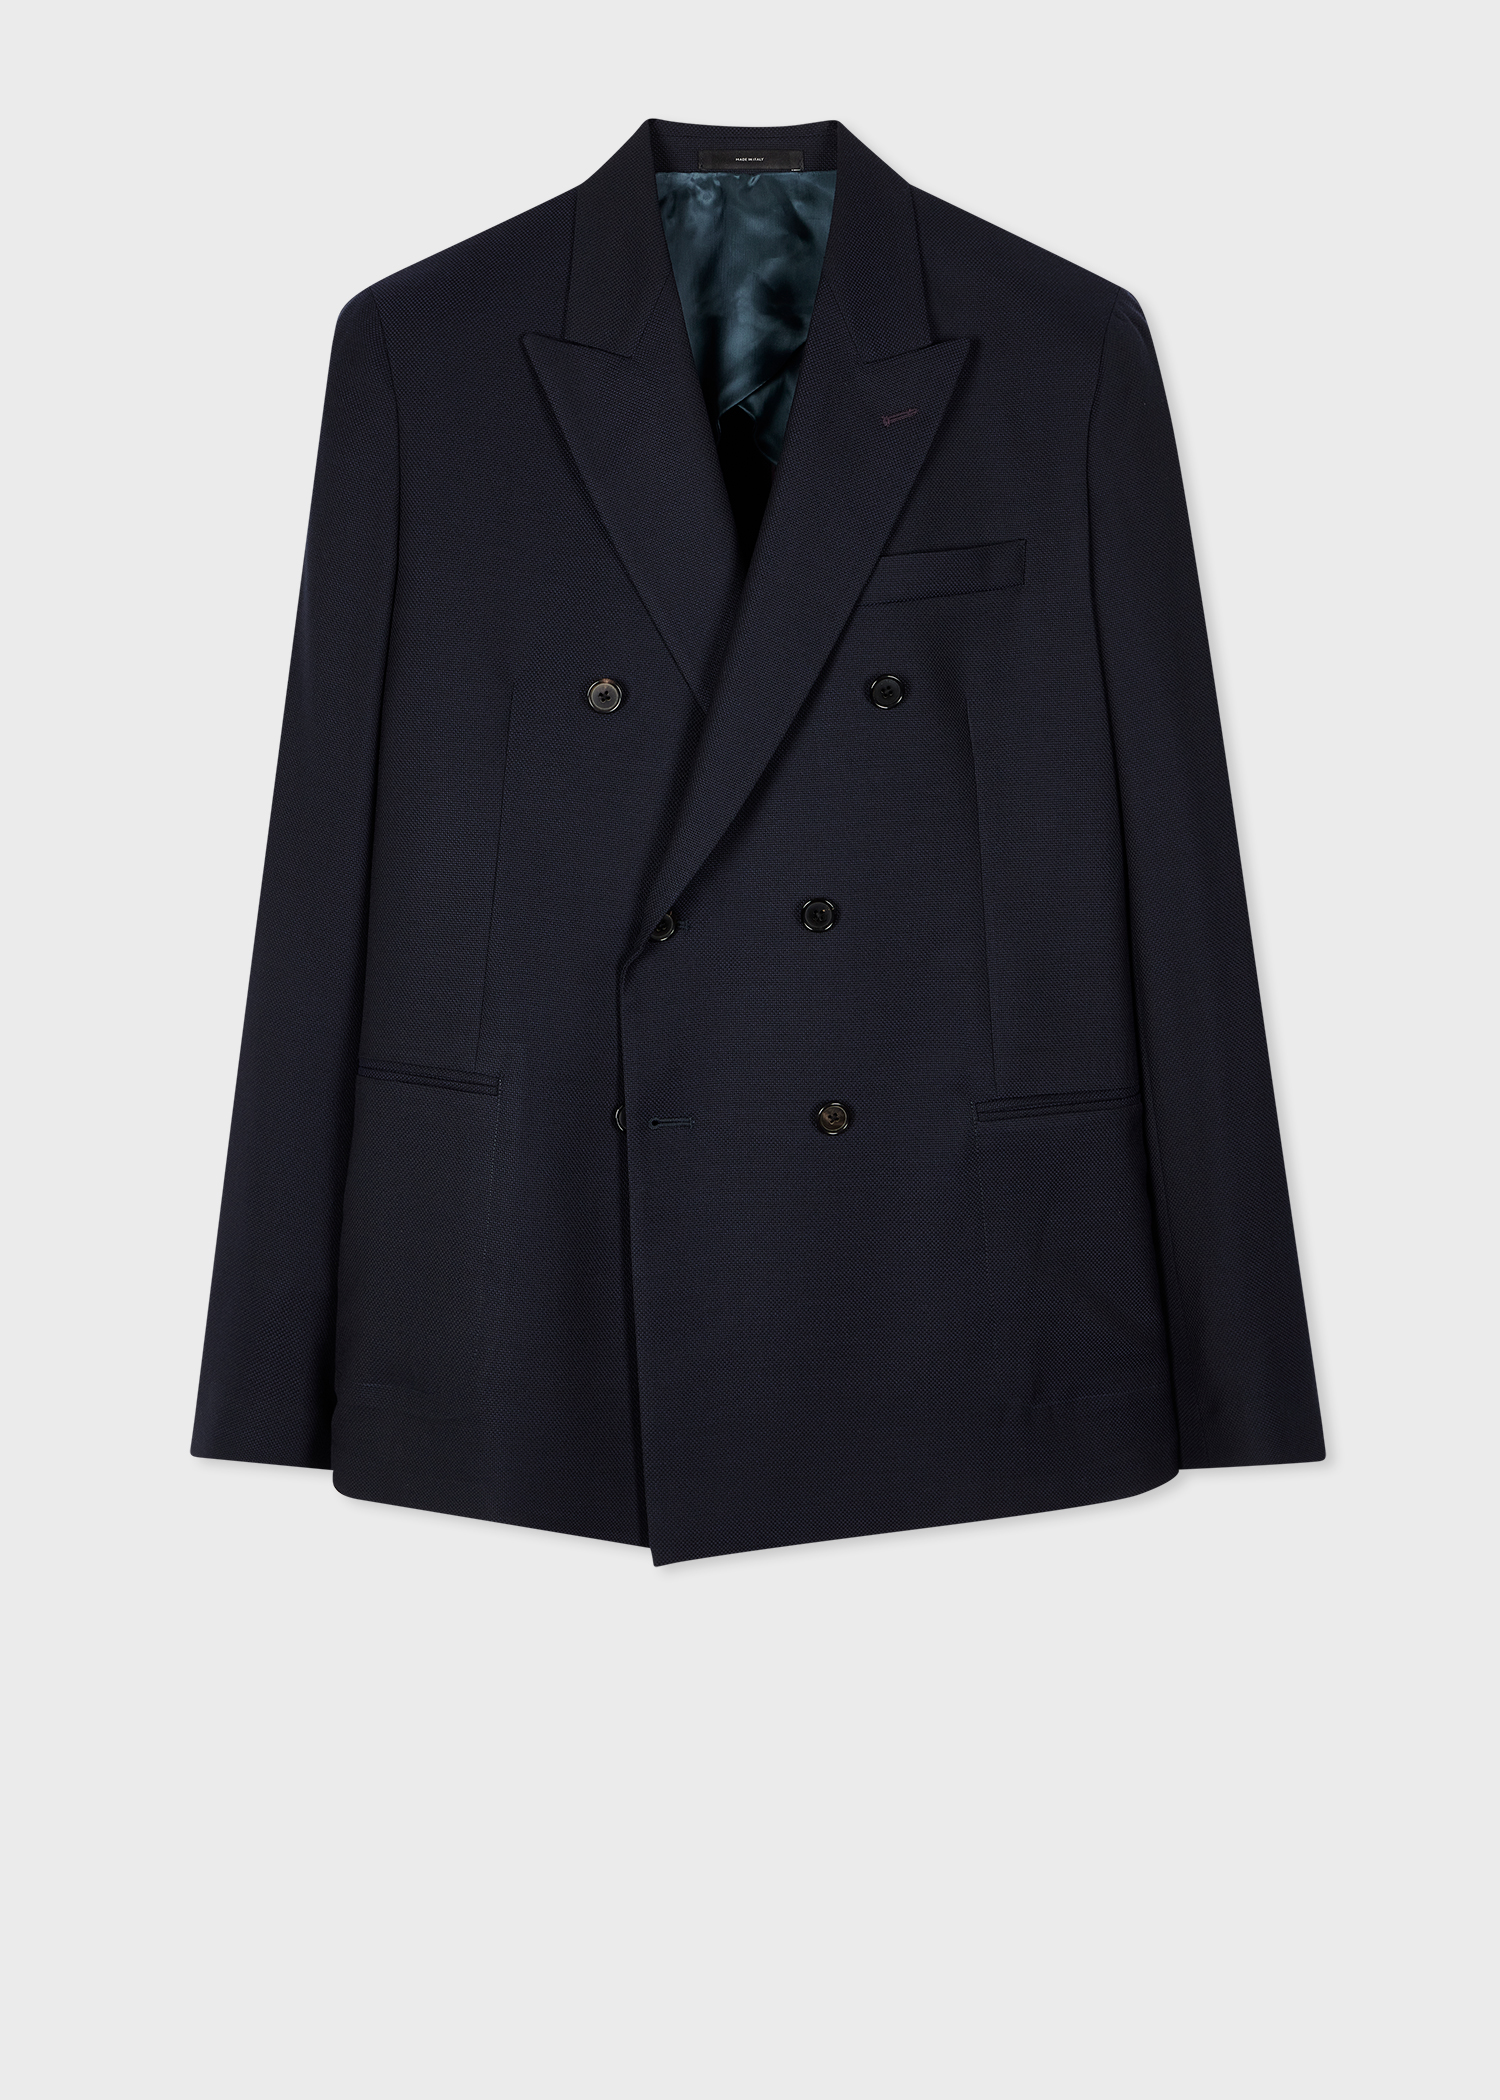 Archive Paul Smith check mohair coat | camillevieraservices.com